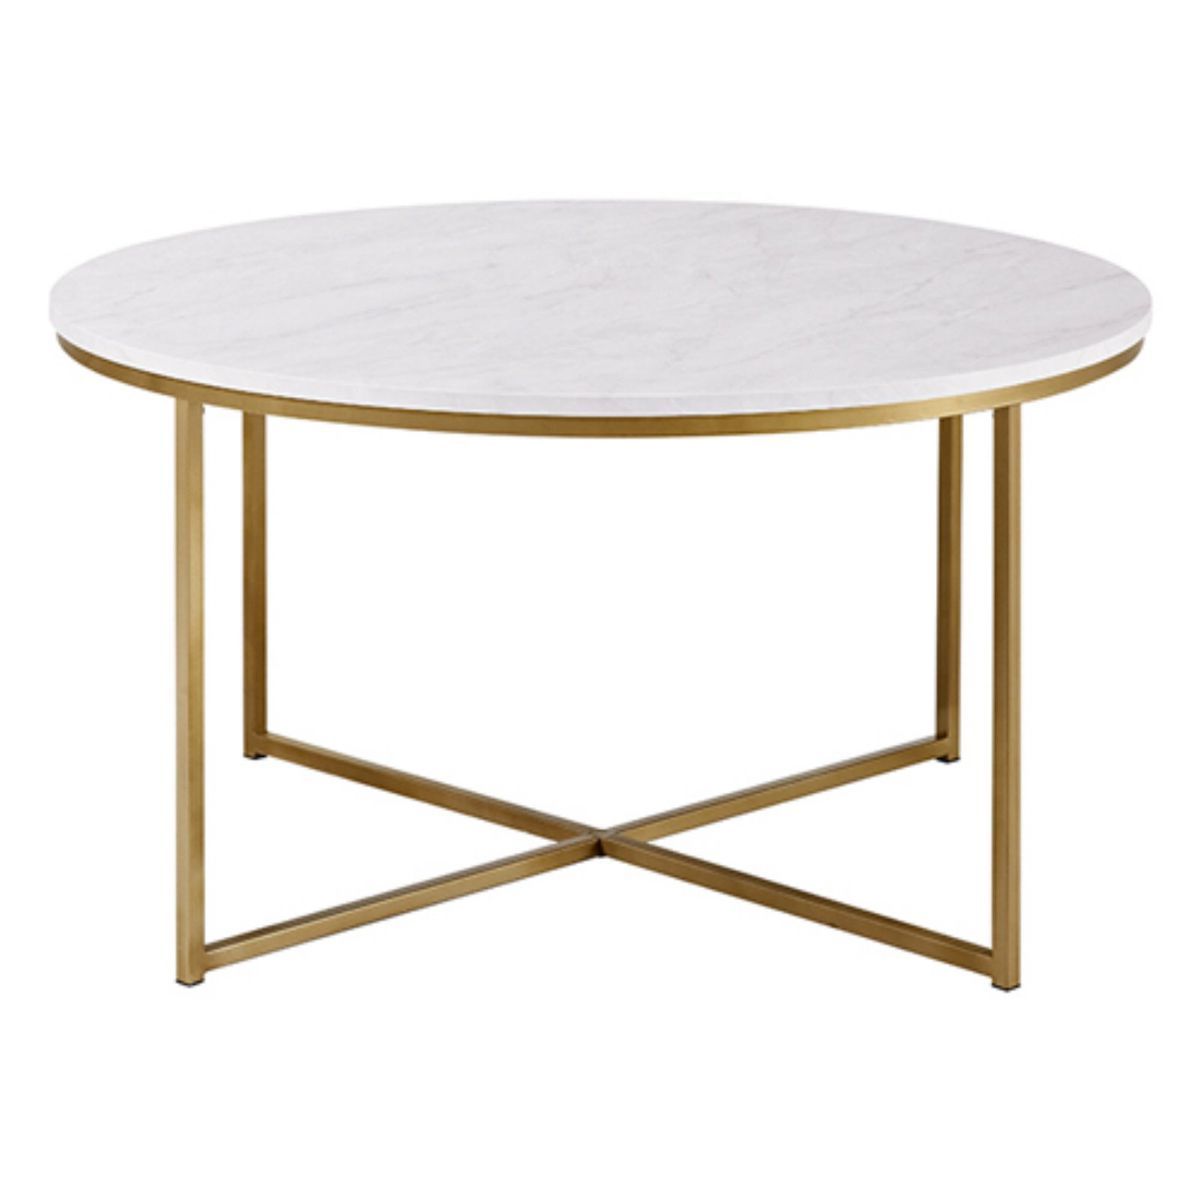 Most Current Modern Round Faux Marble Coffee Tables With Regard To Modern Round White Faux Marble Coffee Table With Gold Base – Walmart (View 8 of 15)